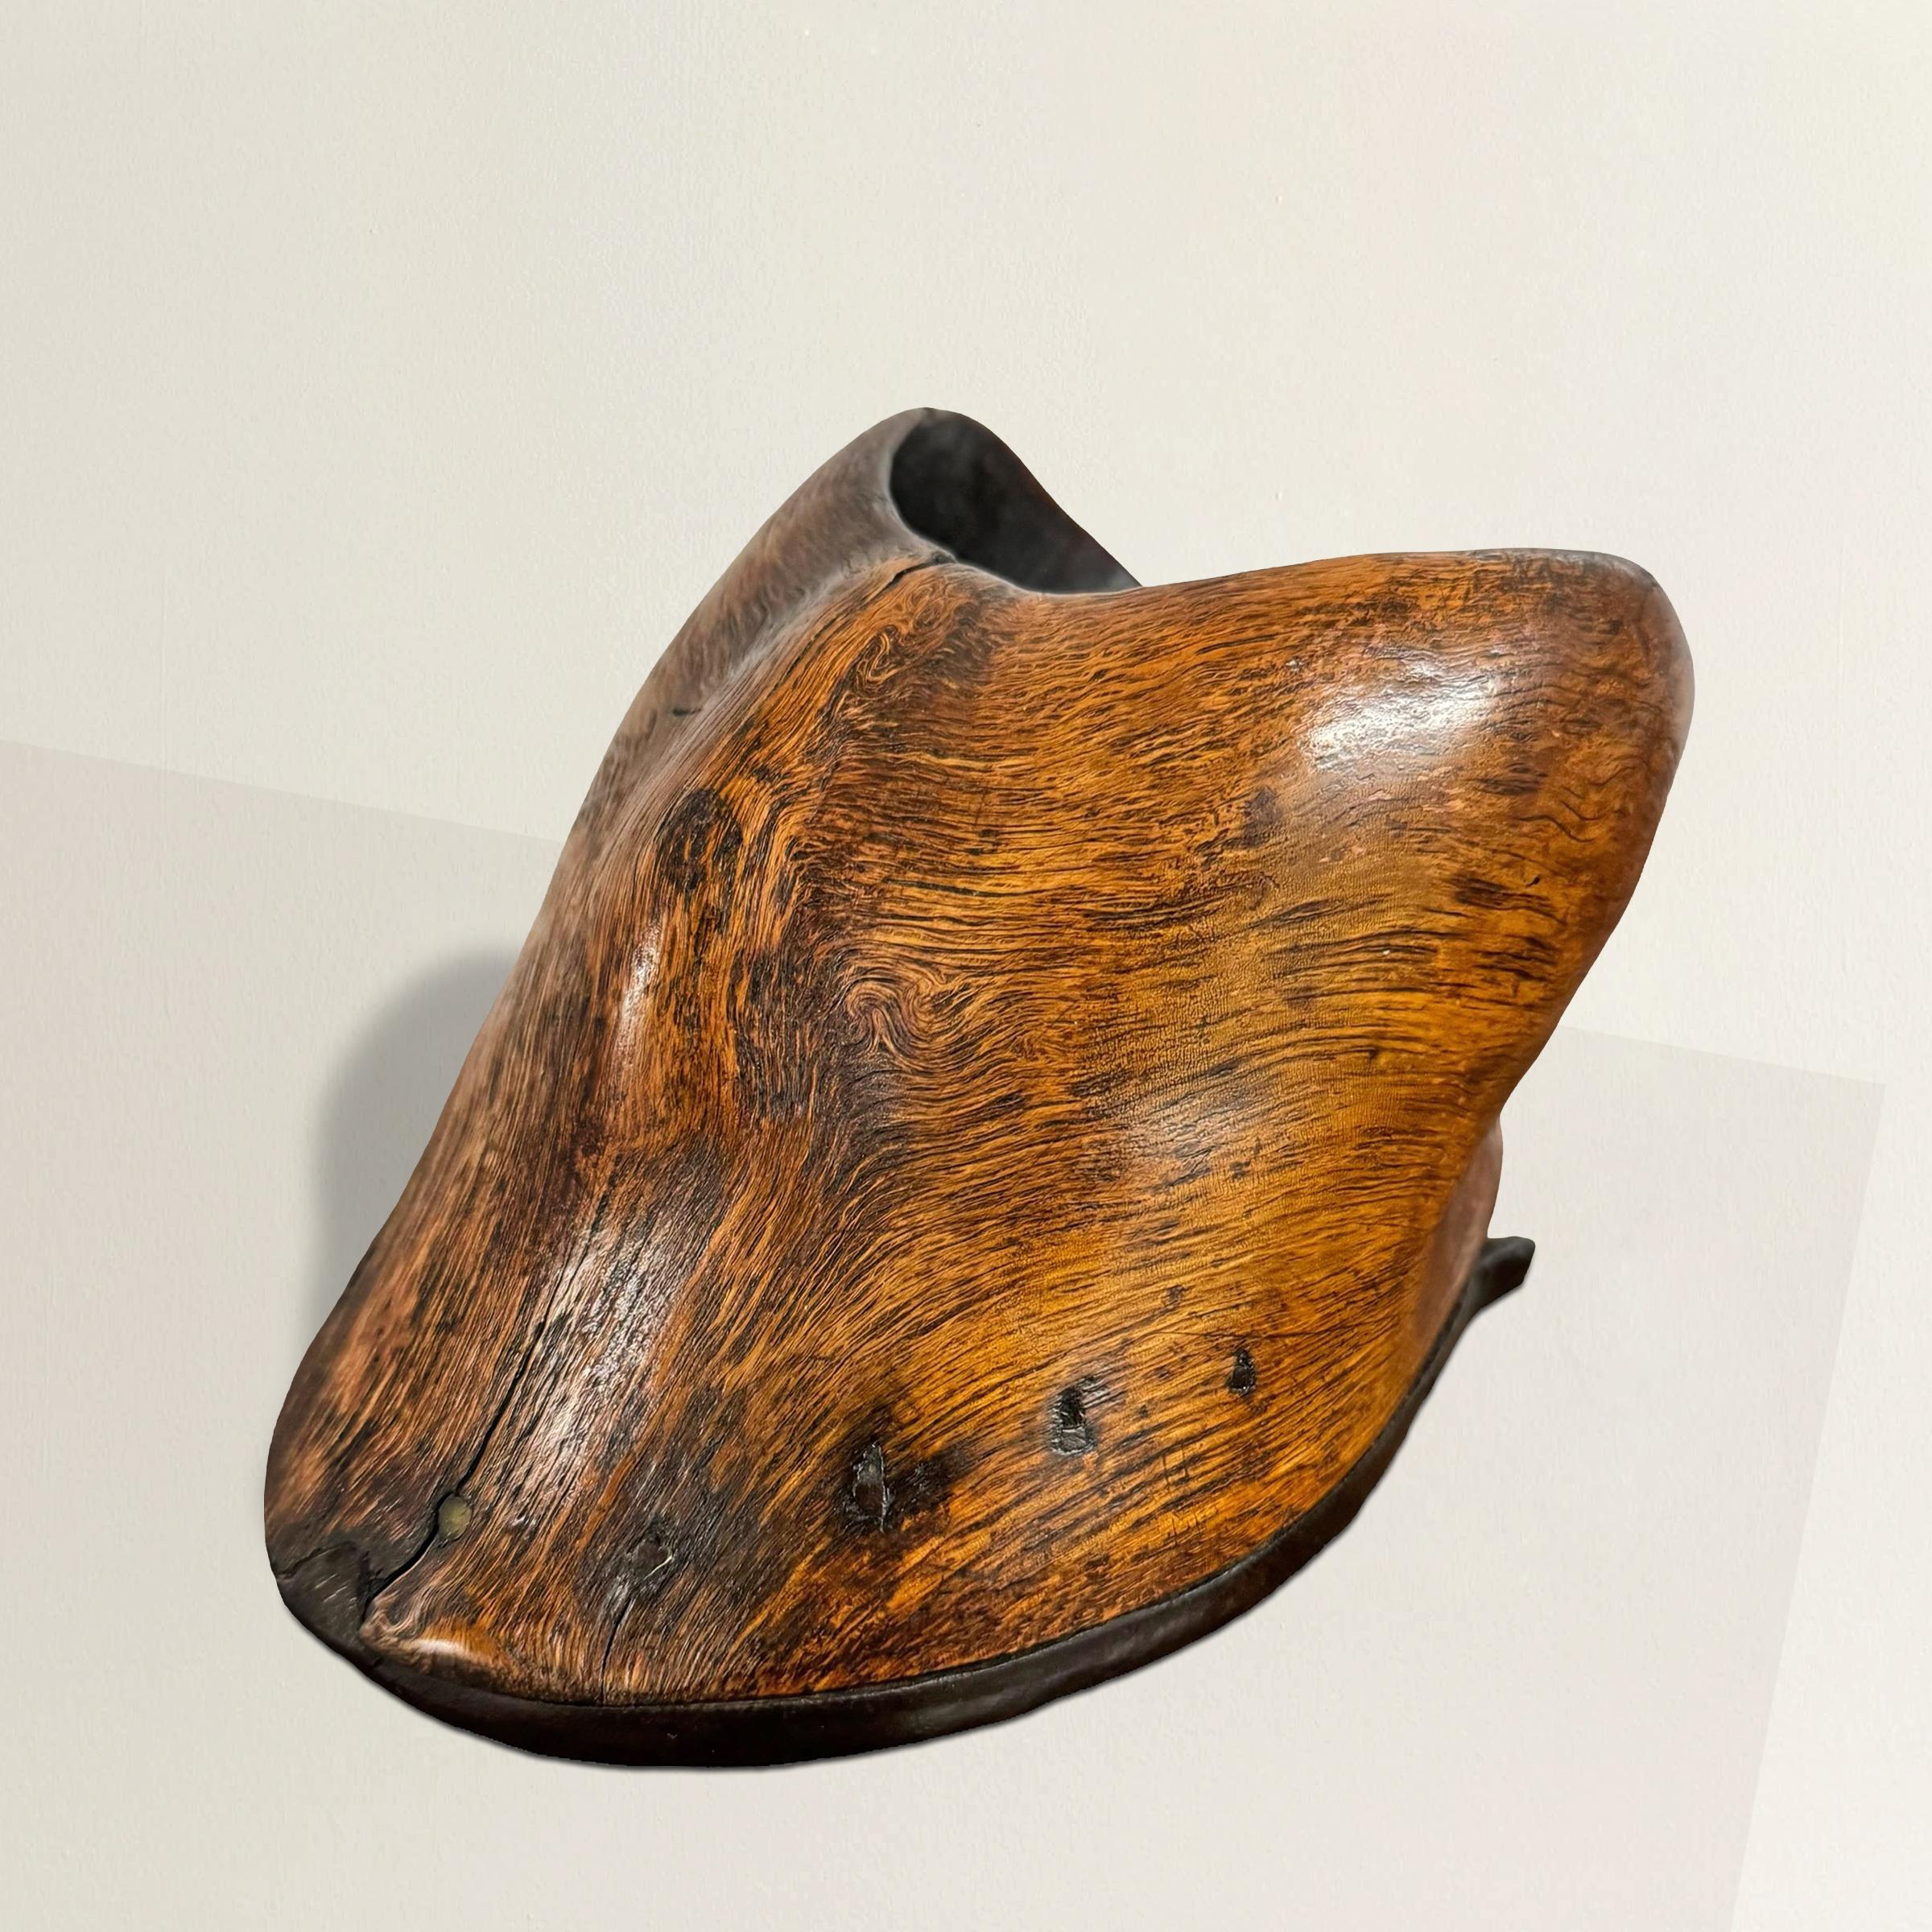 This remarkable 19th-century American Folk Art vessel, expertly carved from a natural burl to resemble a horse's hoof, is a quintessential example of Folk Art's imaginative and unconventional spirit. The meticulous attention to detail is evident in